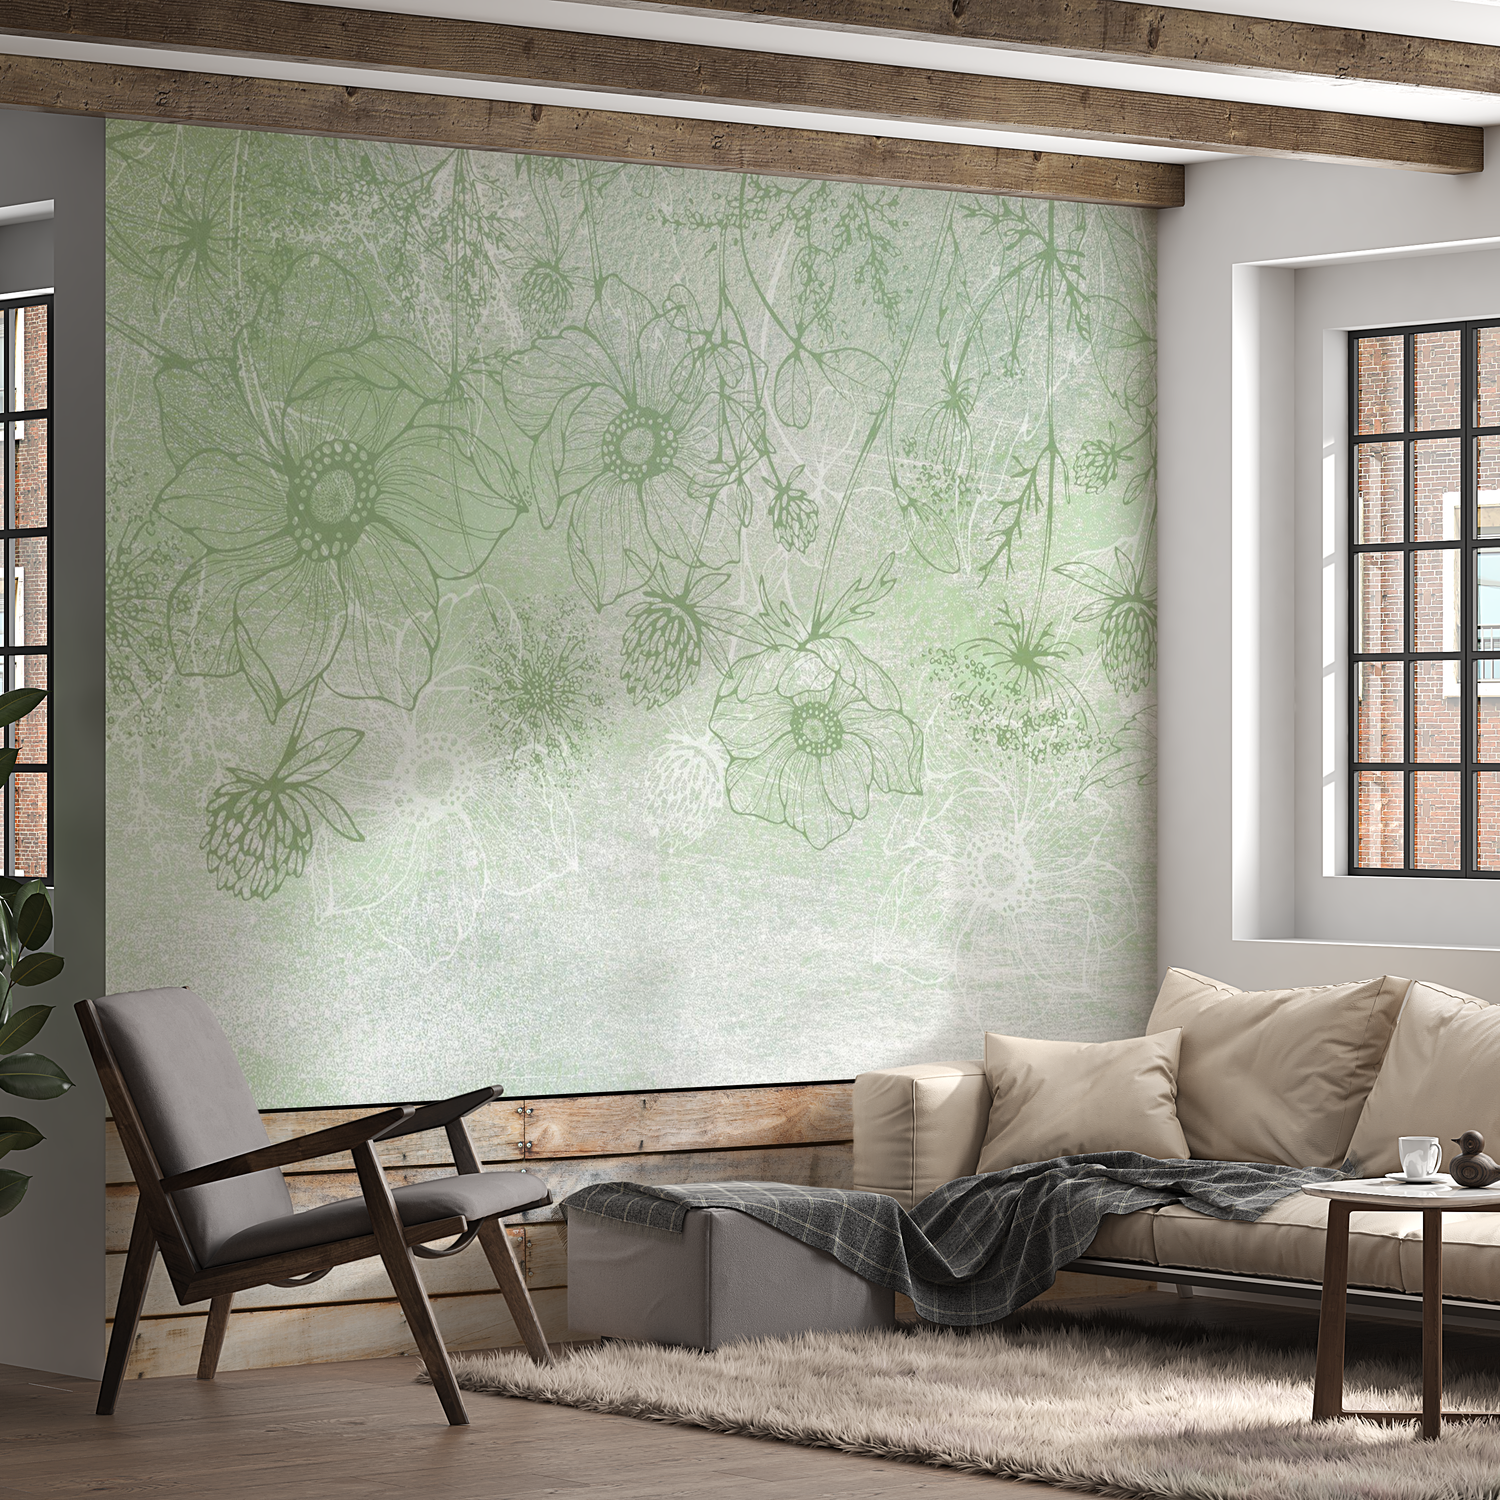 Peel & Stick Botanical Wall Mural - Floral Green Lineart - Removable Wallpaper 38"Wx27"H